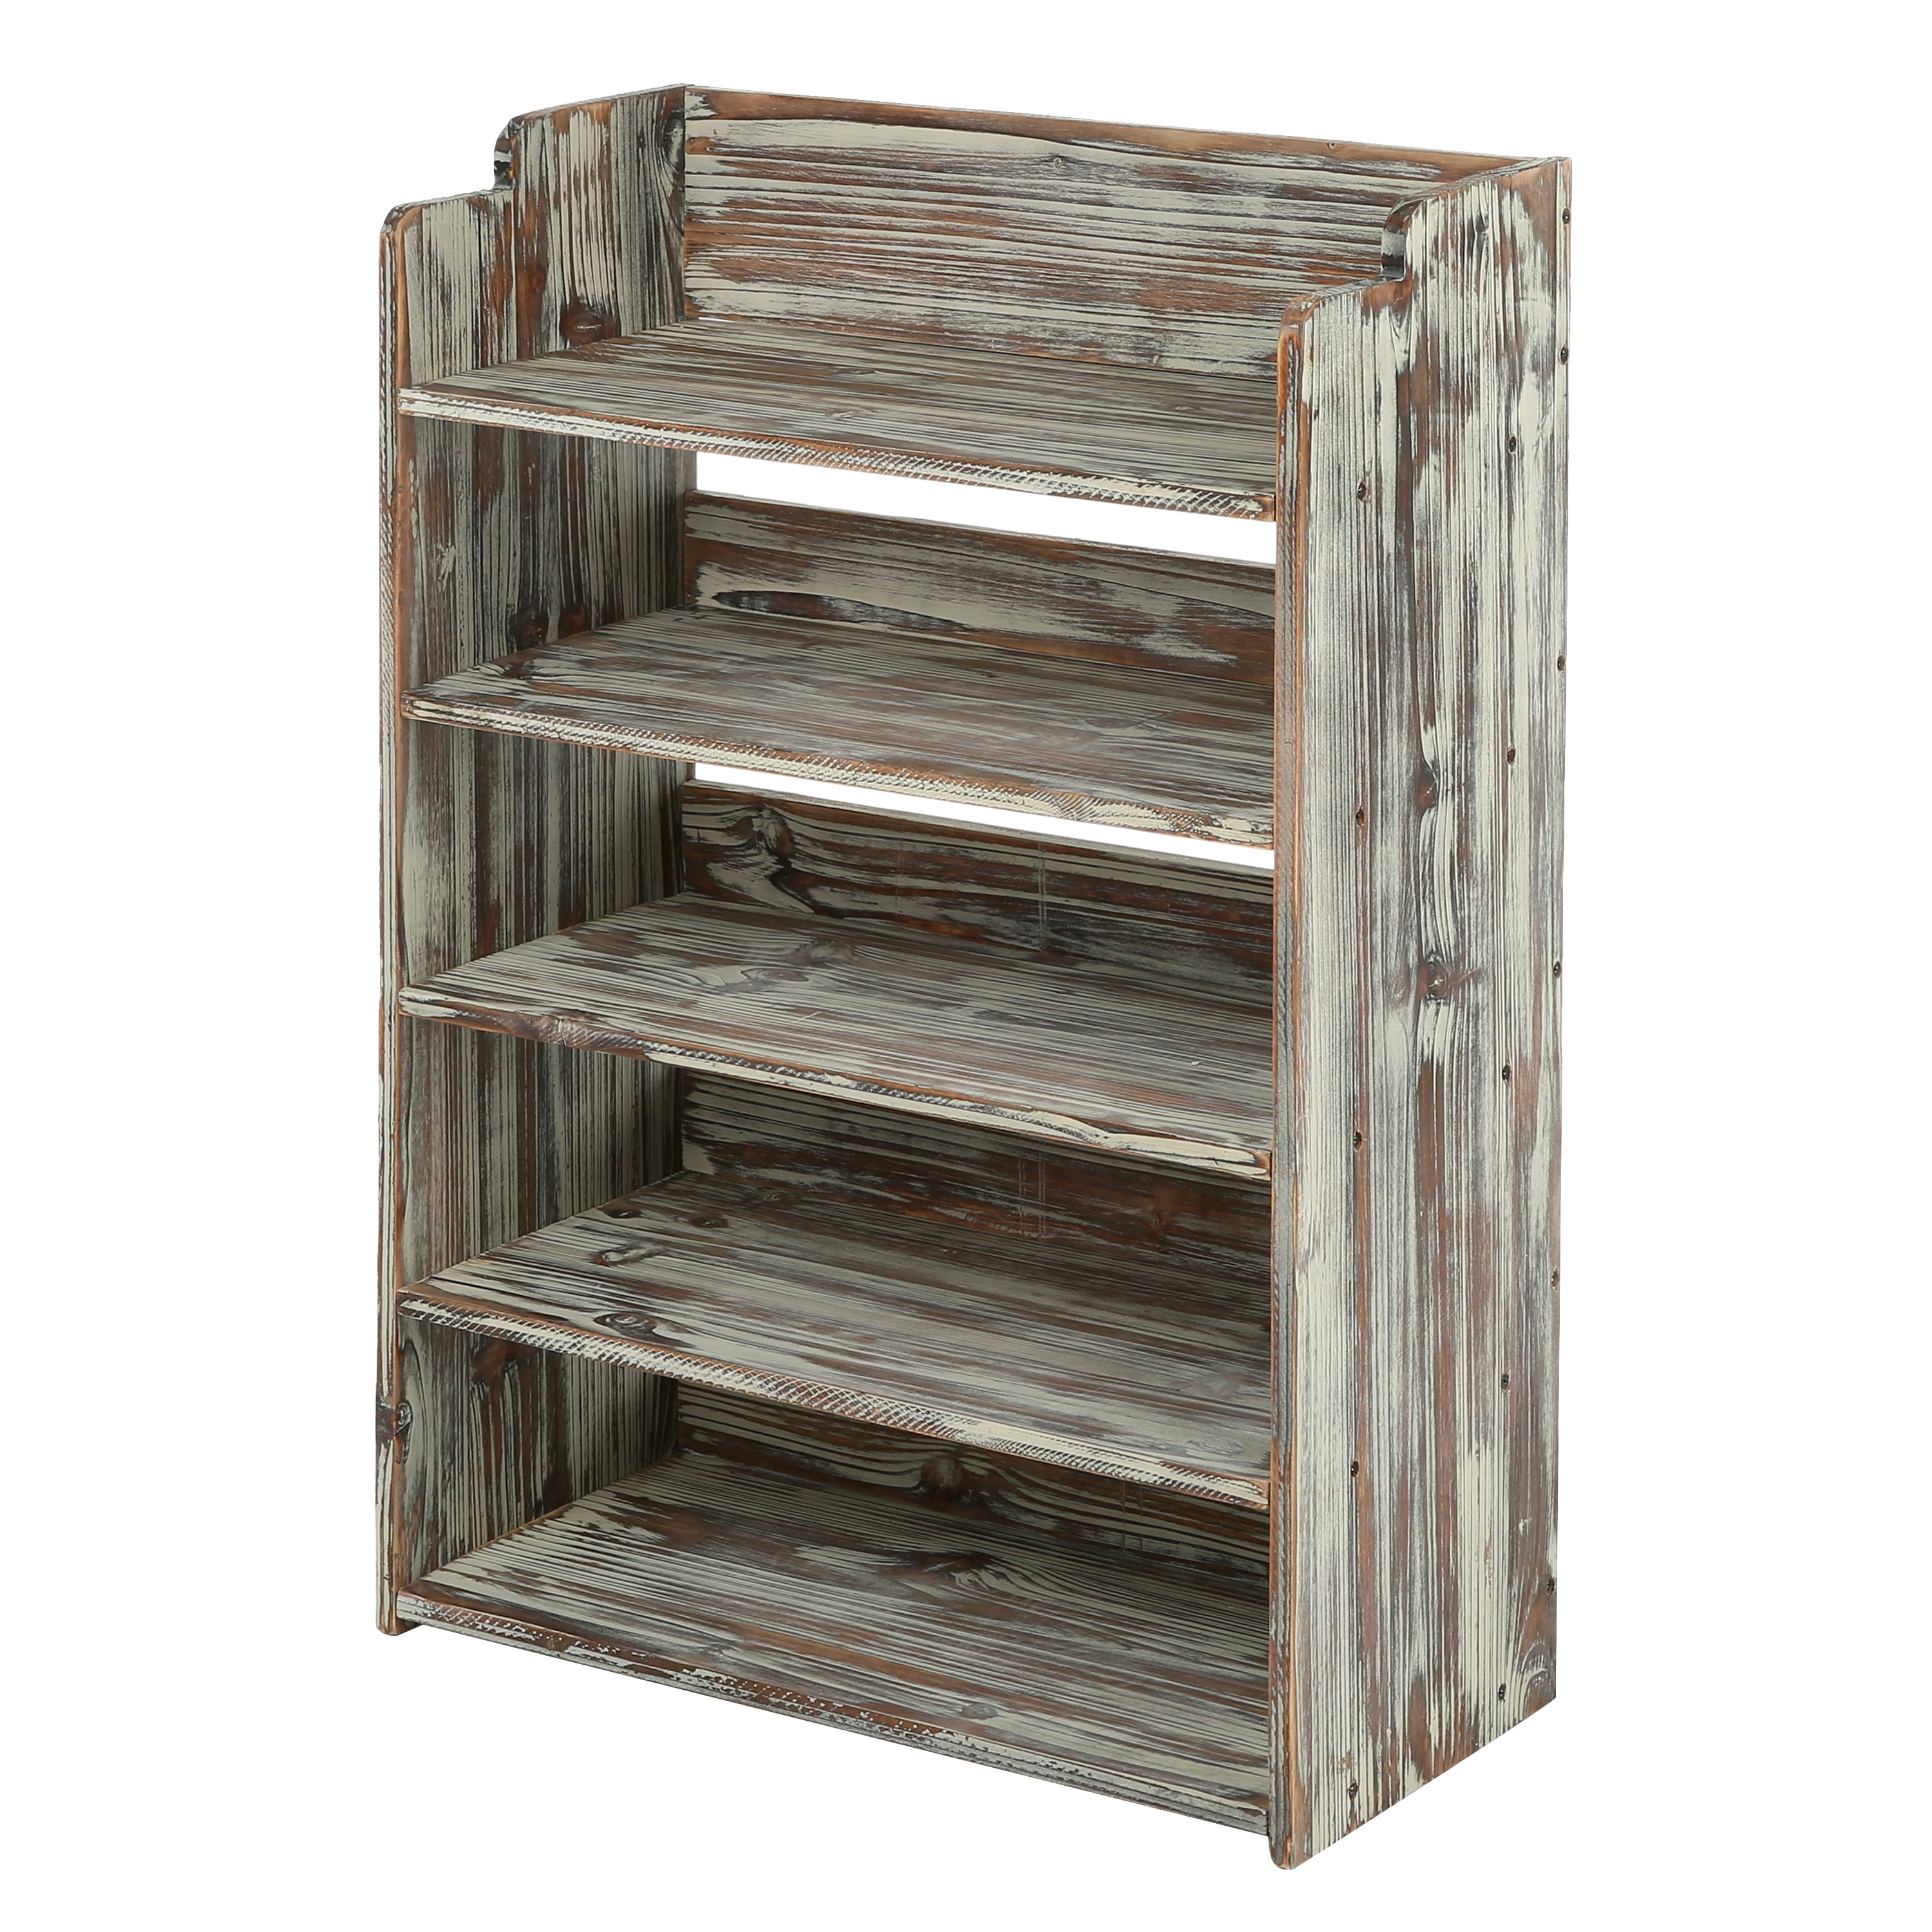 MyGift 5Tier Rustic Torched Wood Entryway Shoe Rack